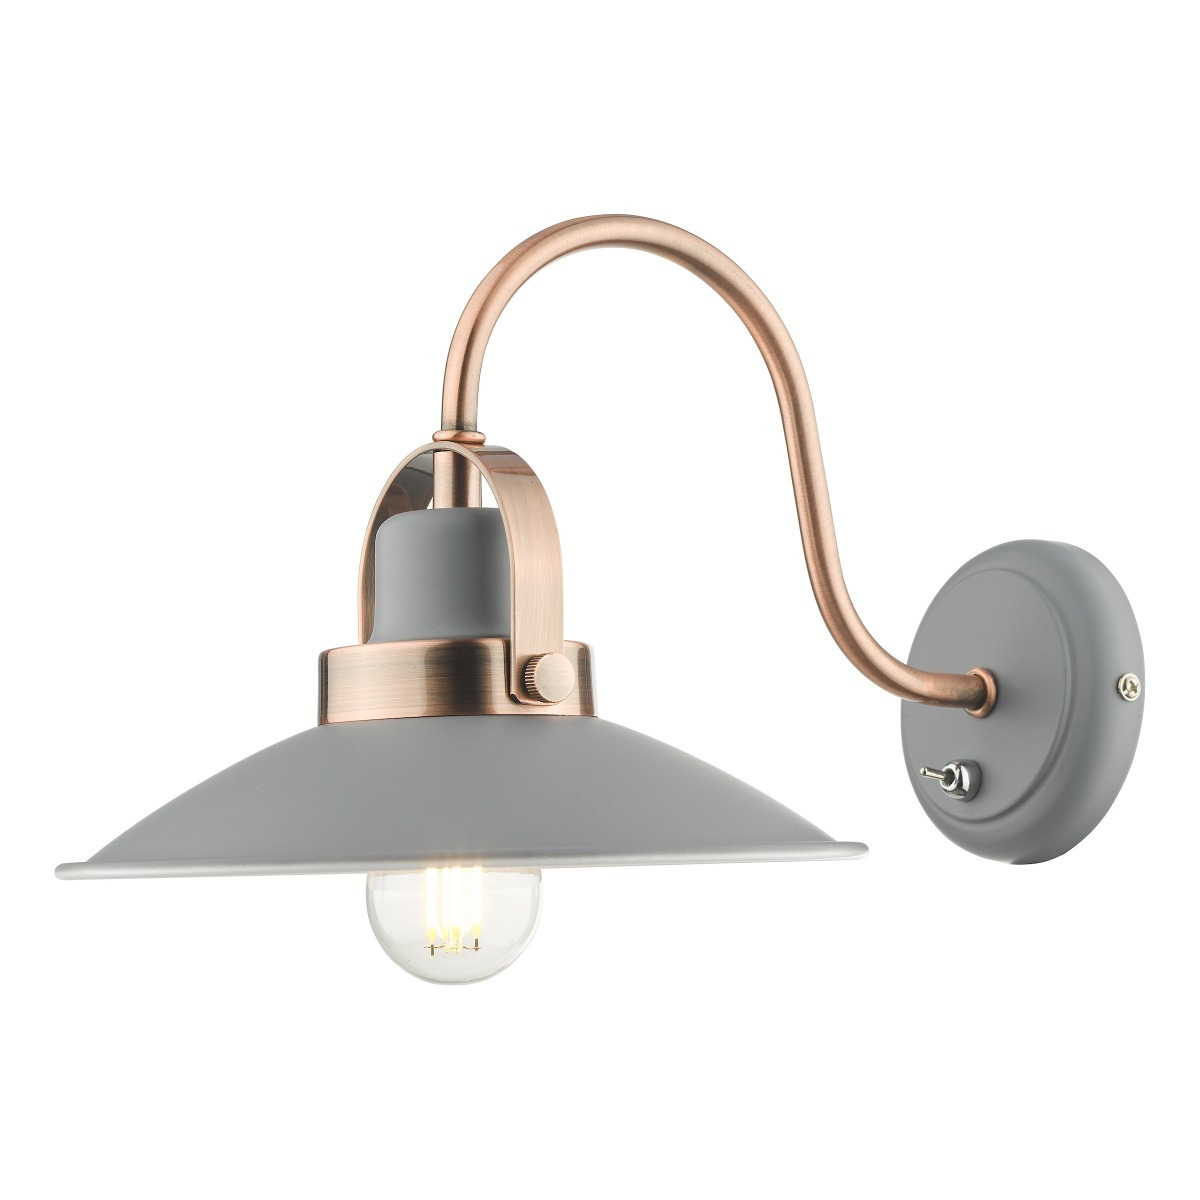 Dar Lighting Liden Single Wall Light In Grey And Copper Finish